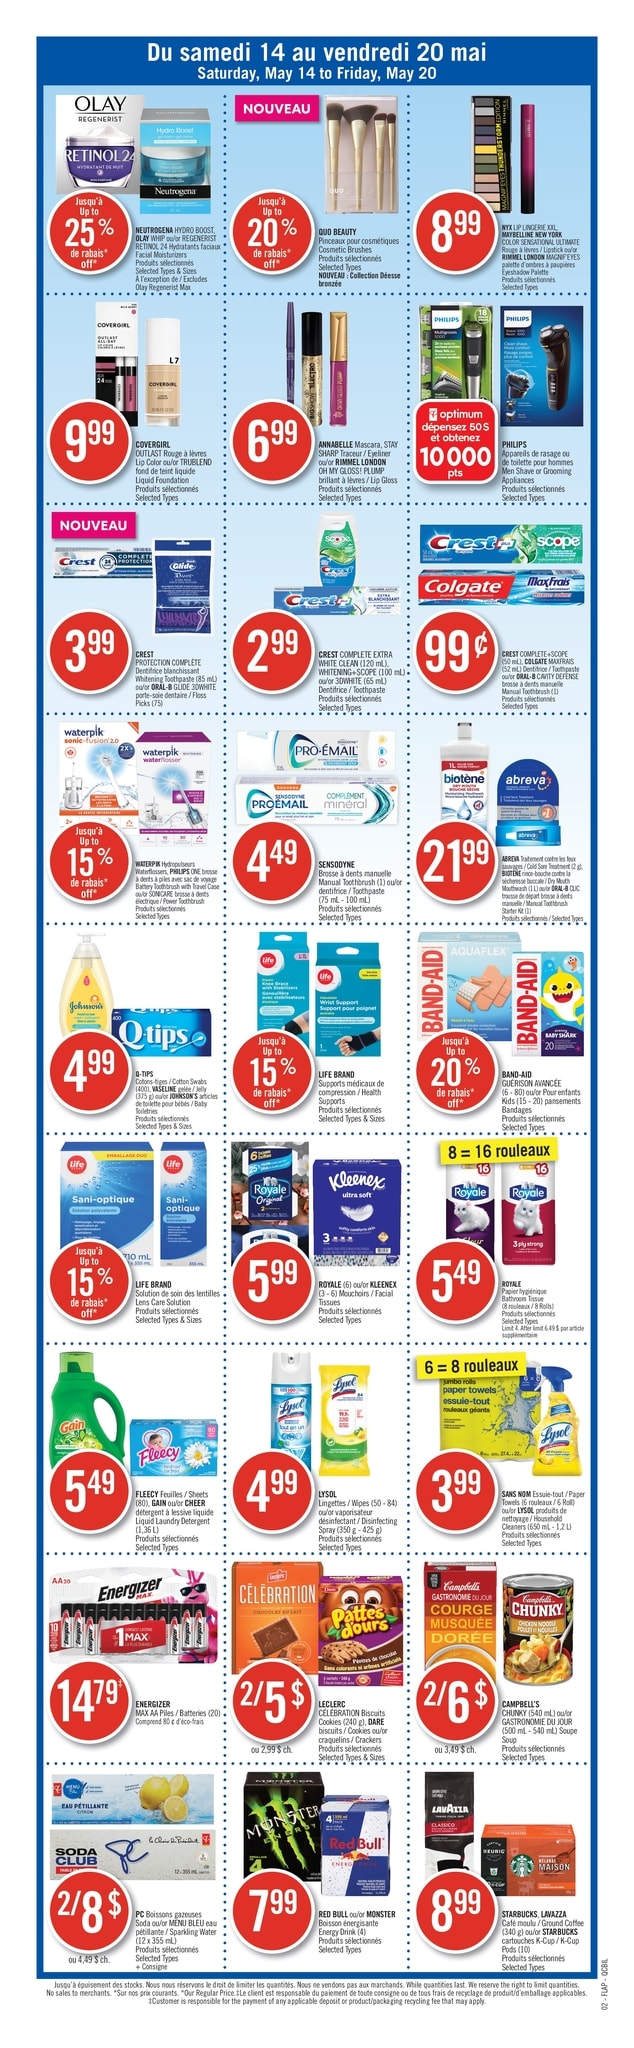 Pharmaprix - Weekly Flyer Specials - Page 2